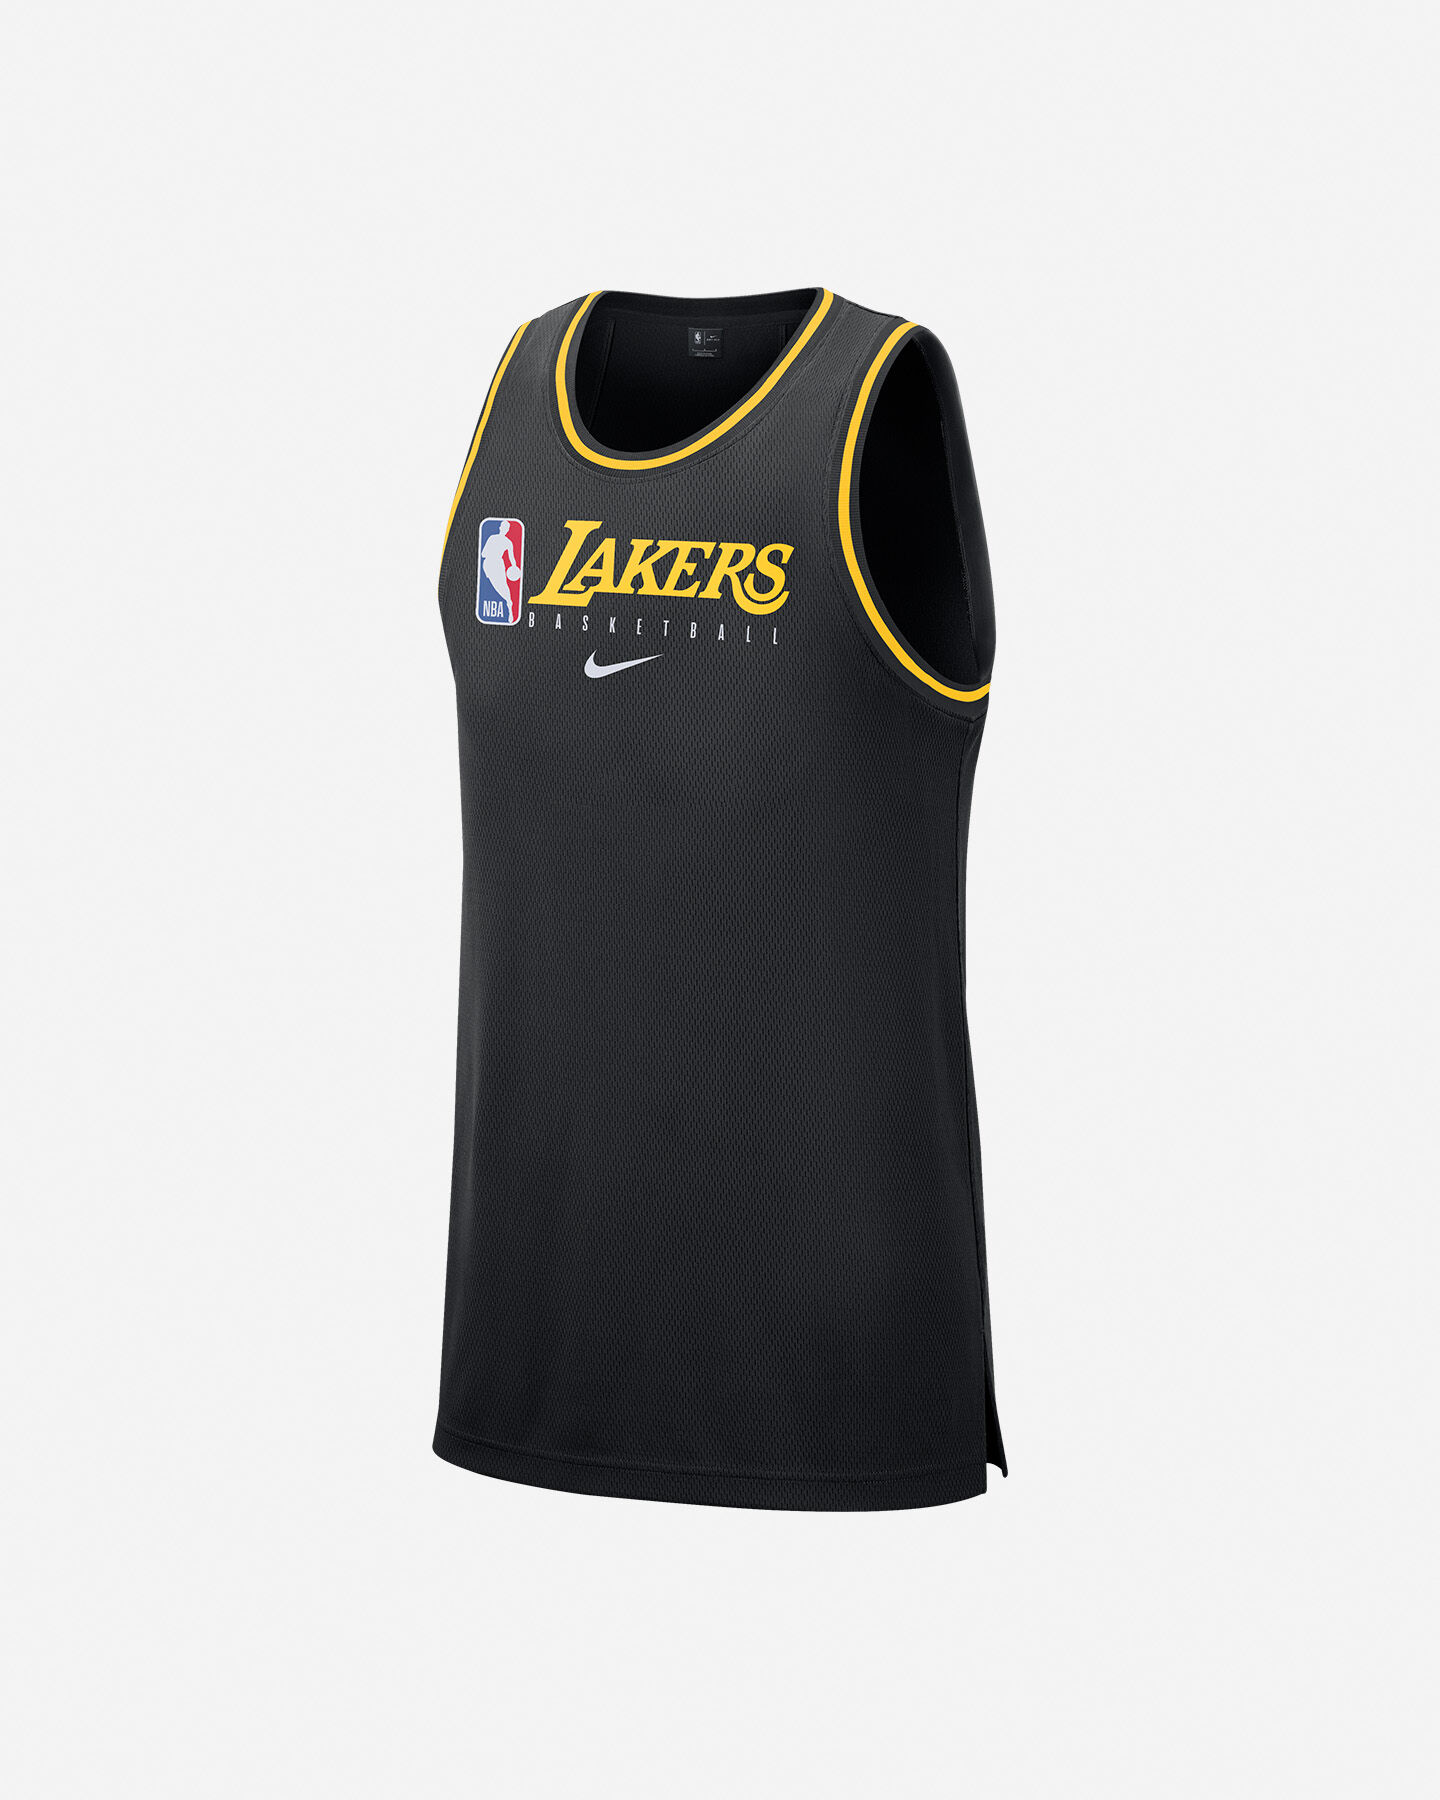  Canotta basket NIKE LOS ANGELES LAKERS DRI-FIT M S5072894|010|S scatto 0